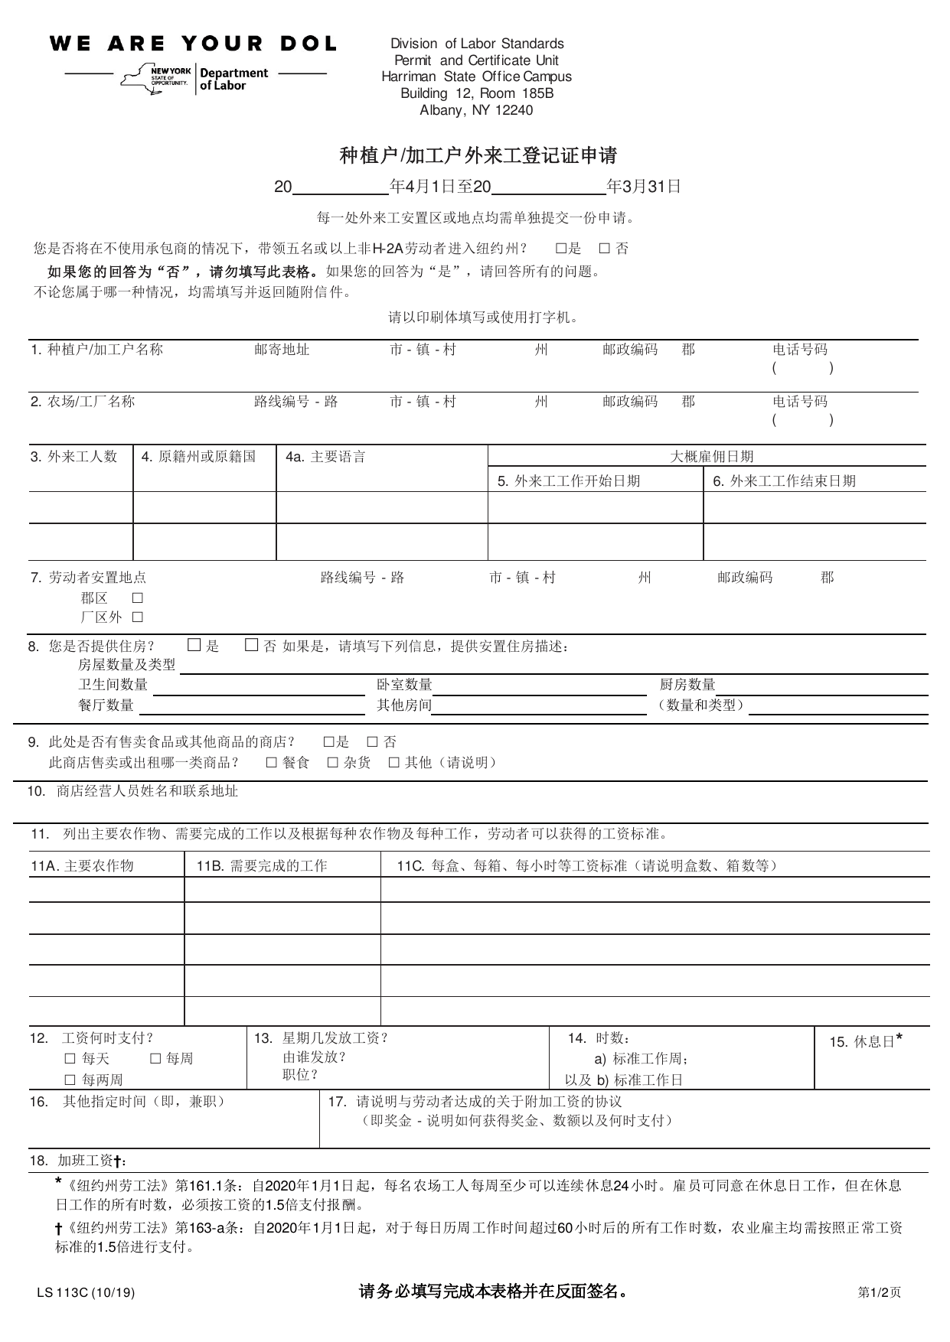 Form LS113C Application for Growers / Processor Certificate of Migrant Registration - New York (Chinese), Page 1